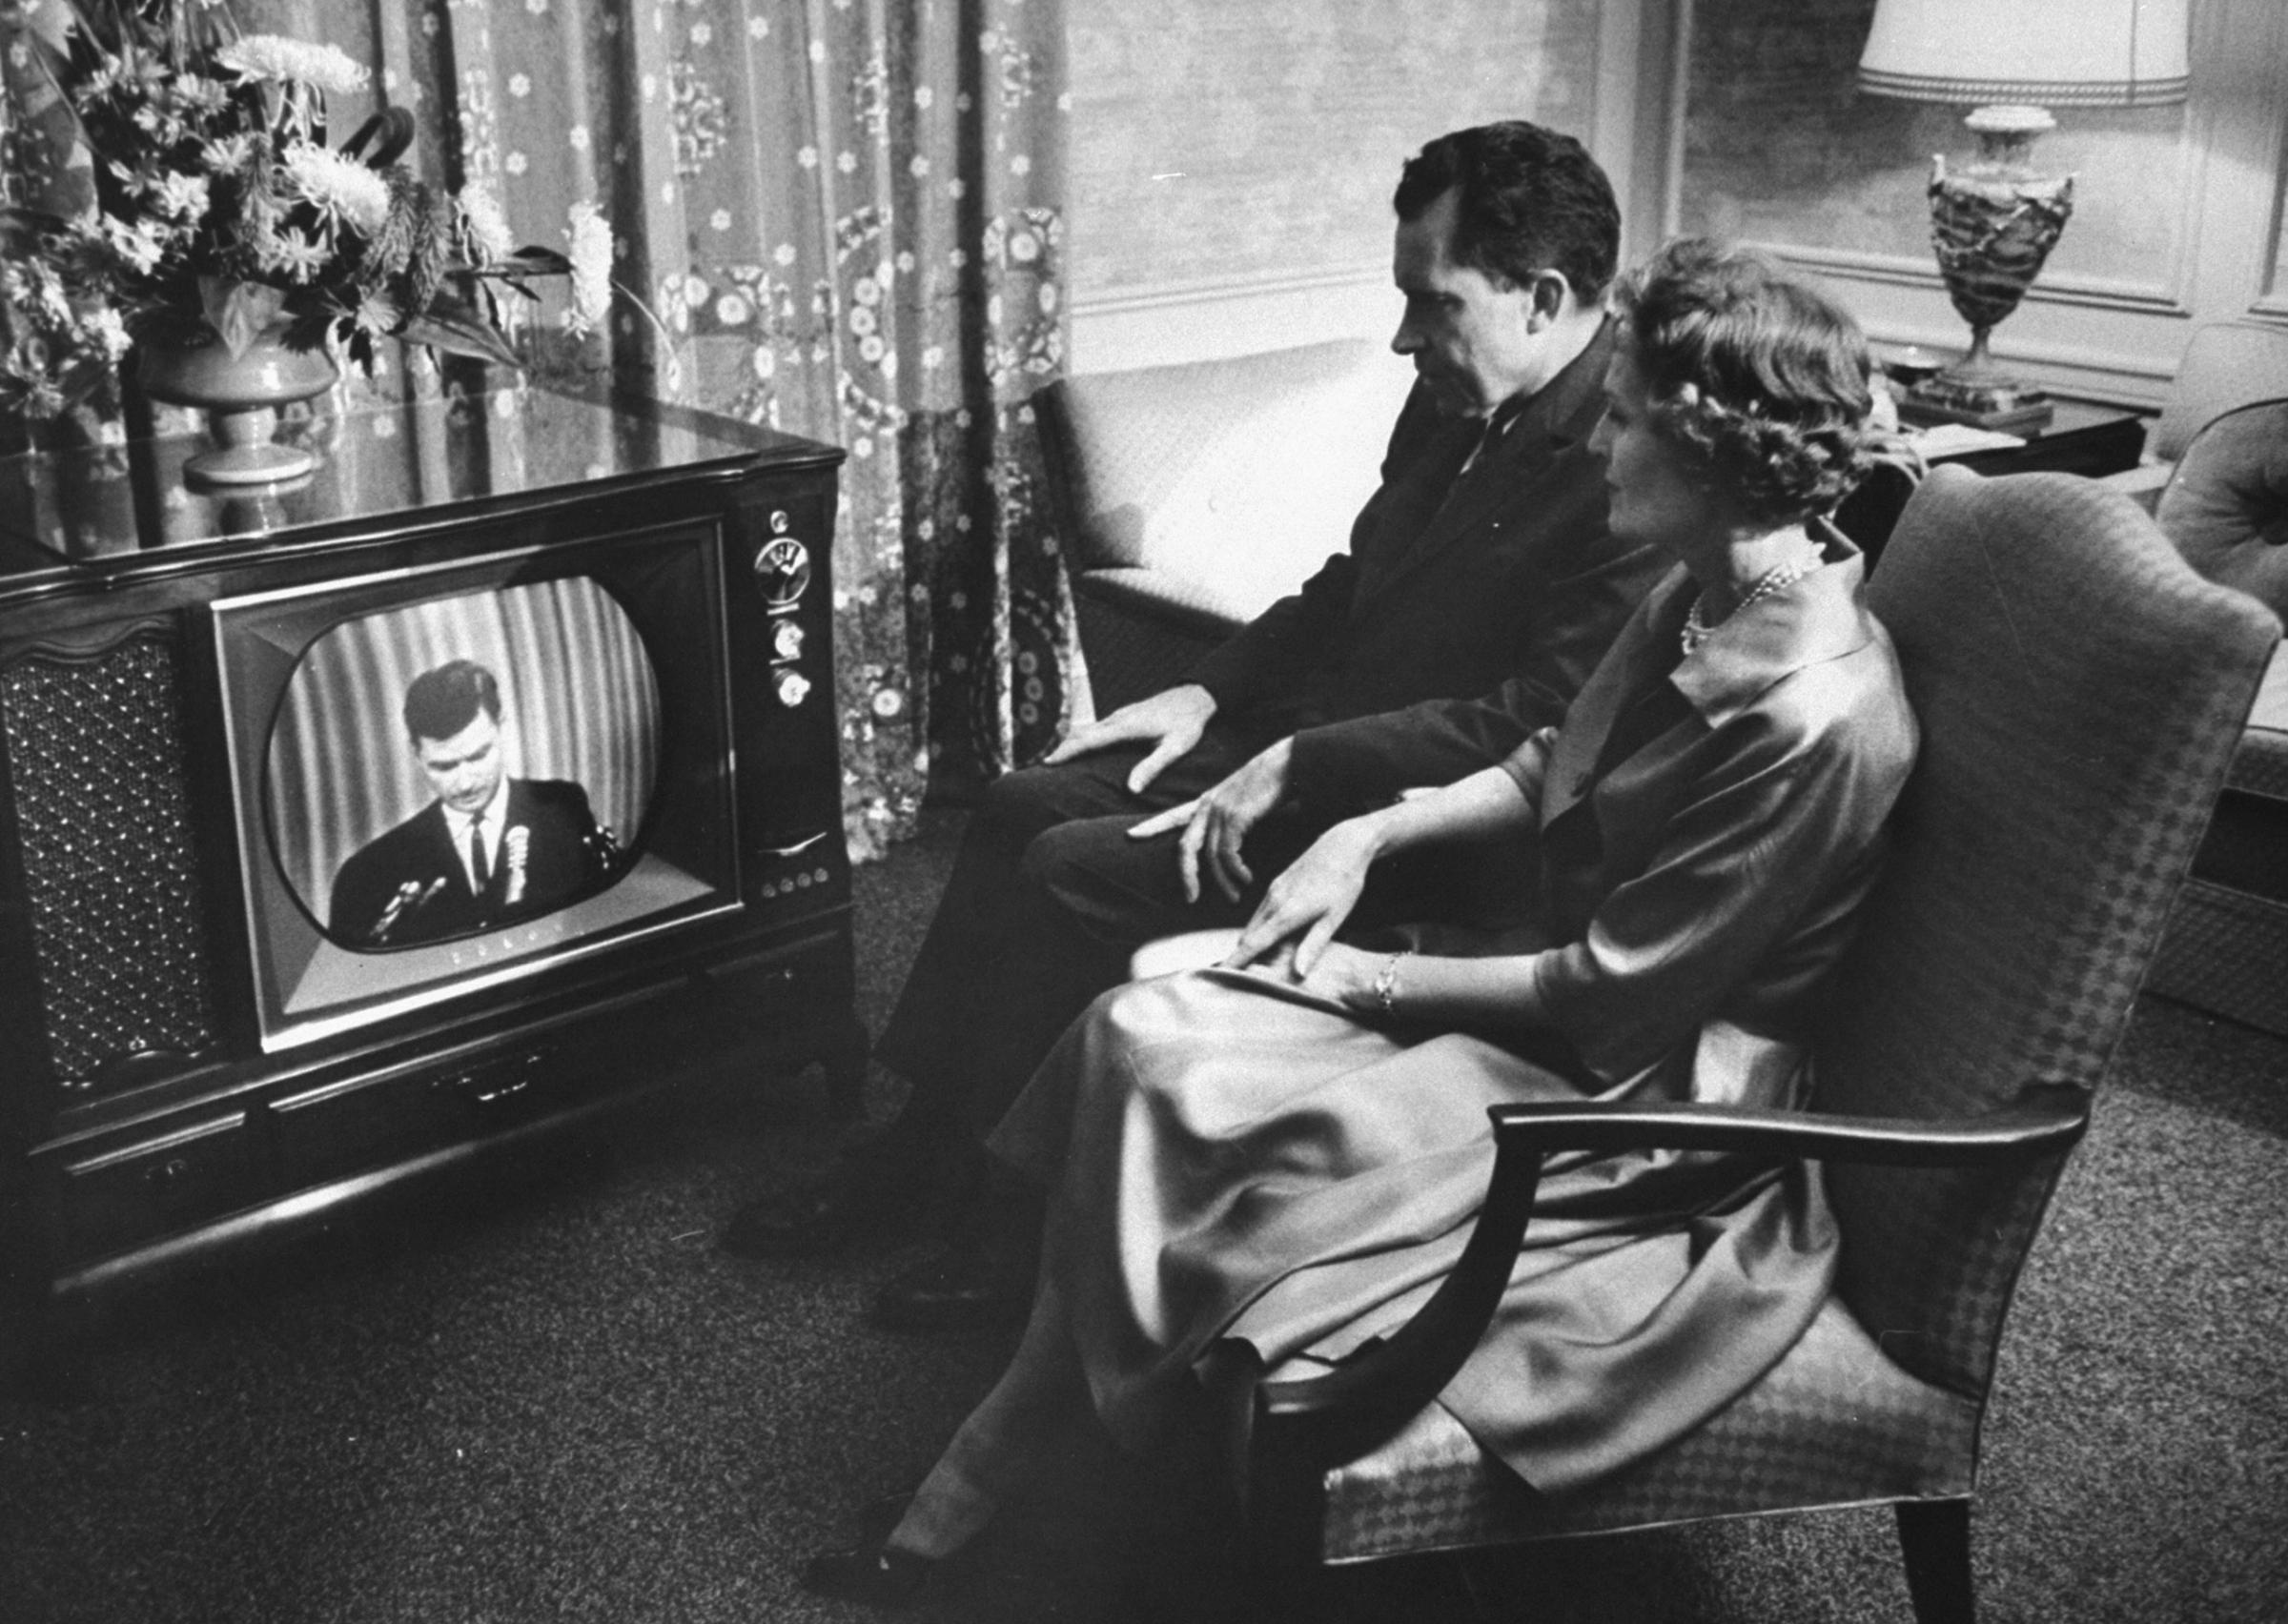 Vice President Richard Nixon and his wife, Pat, watch the 1960 GOP convention in Chicago from their hotel suite.